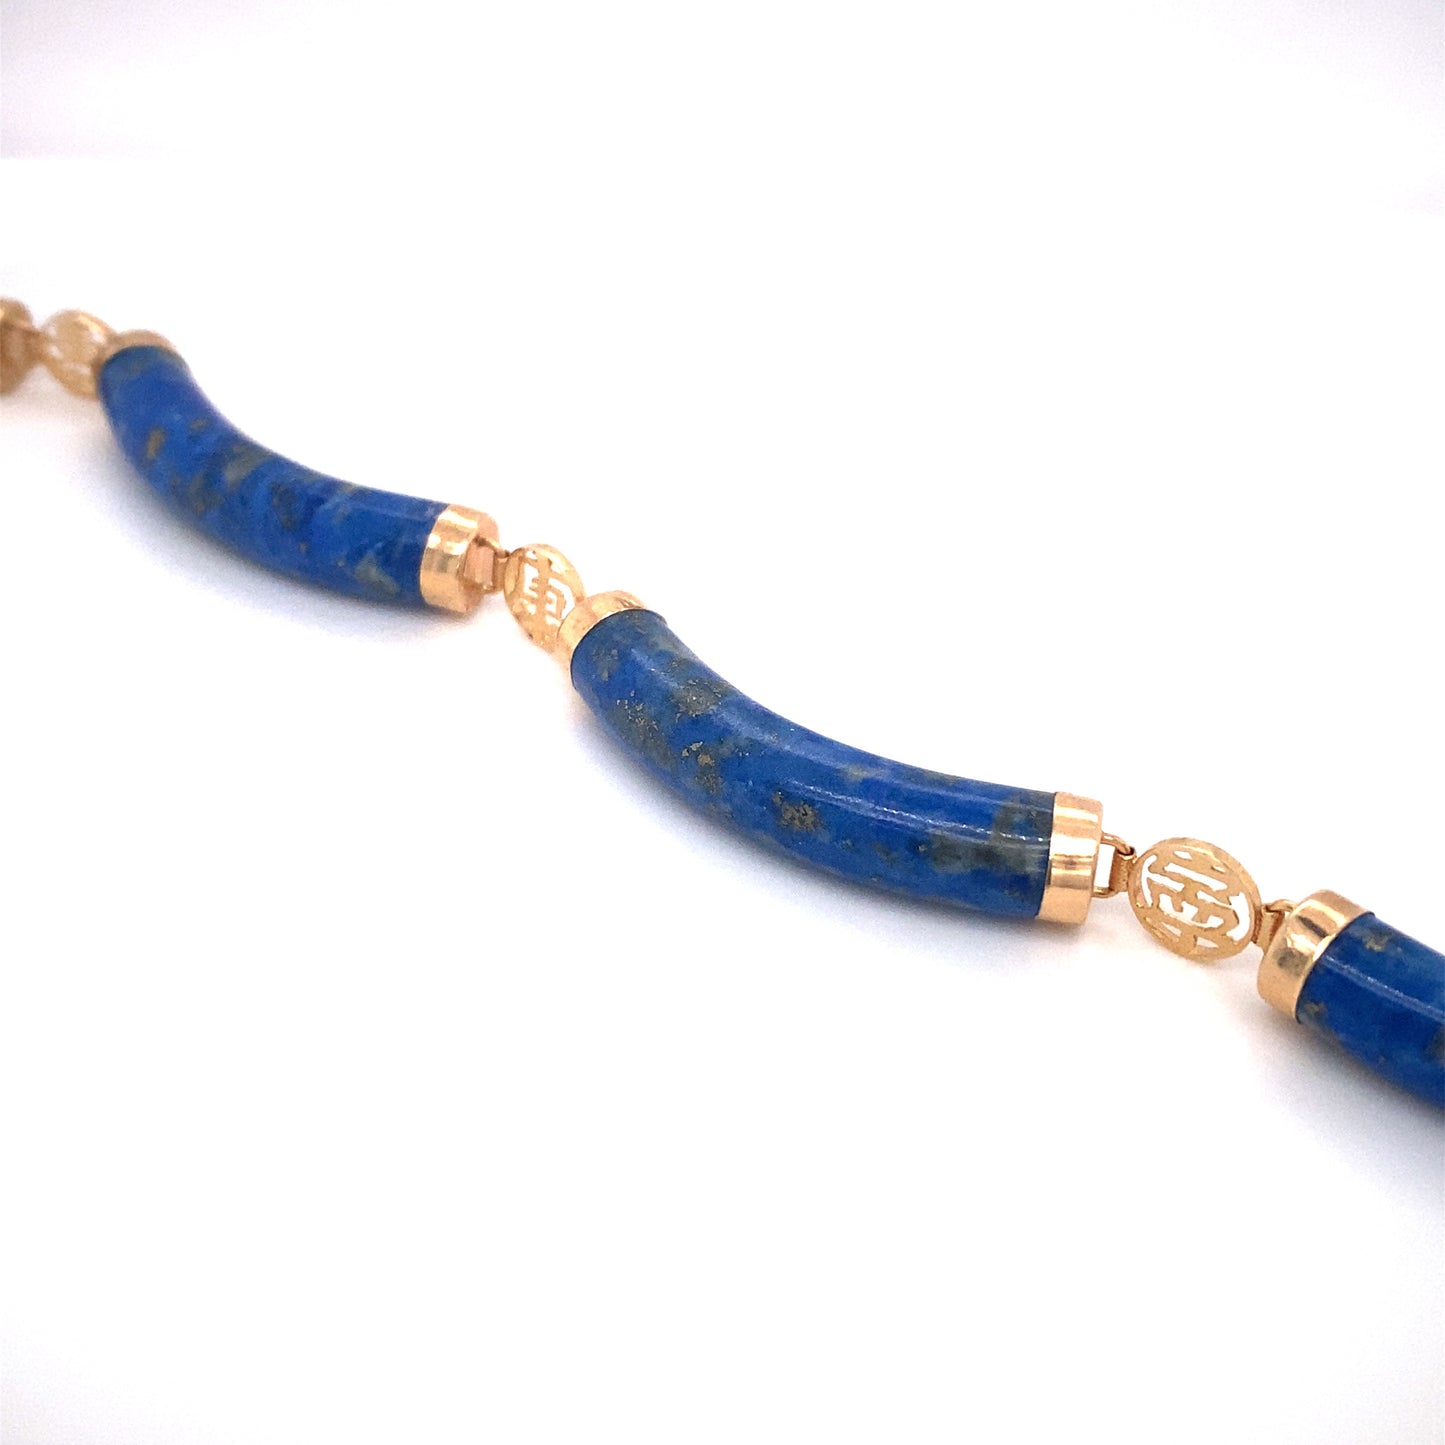 Circa 1980s Chinese Luck Symbol Lapis Lazuli Curved Link Bracelet in 14K Gold